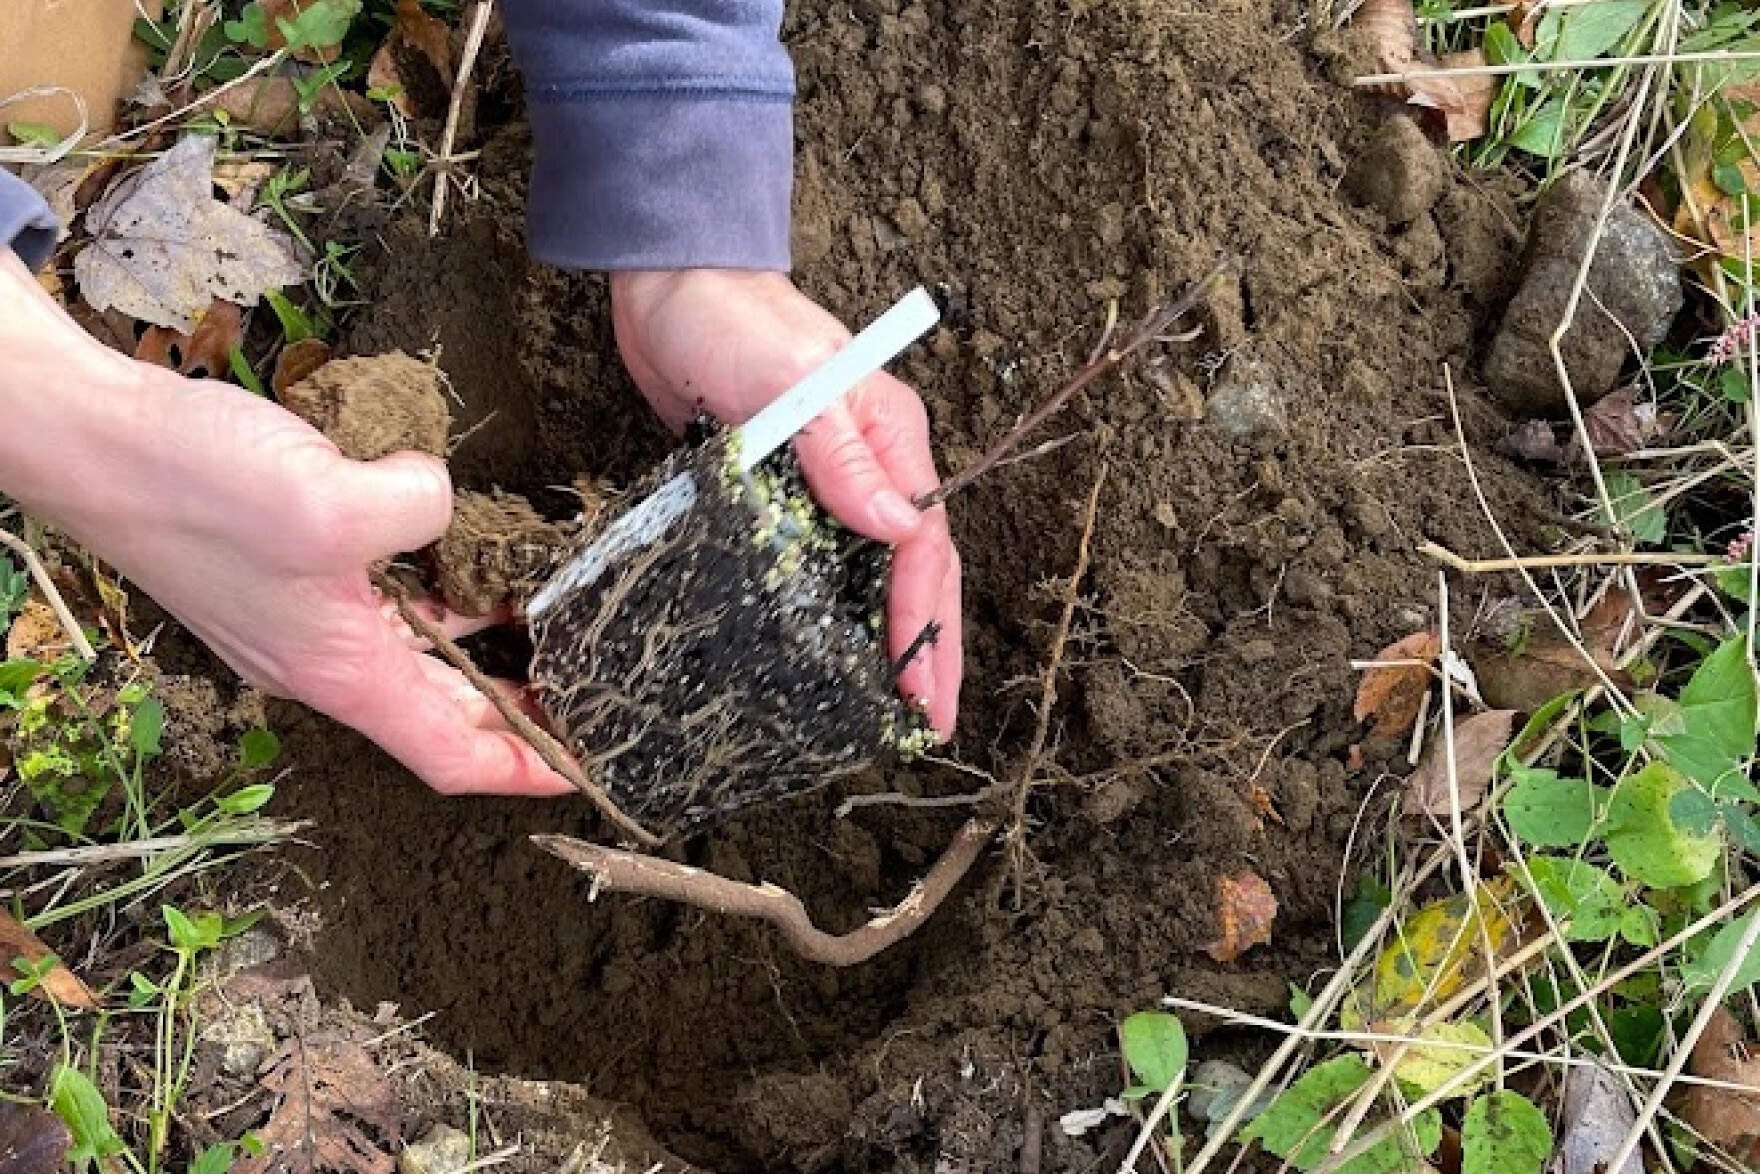 A researcher places a seedling into the earth. (Carrie Healy/NEPM)